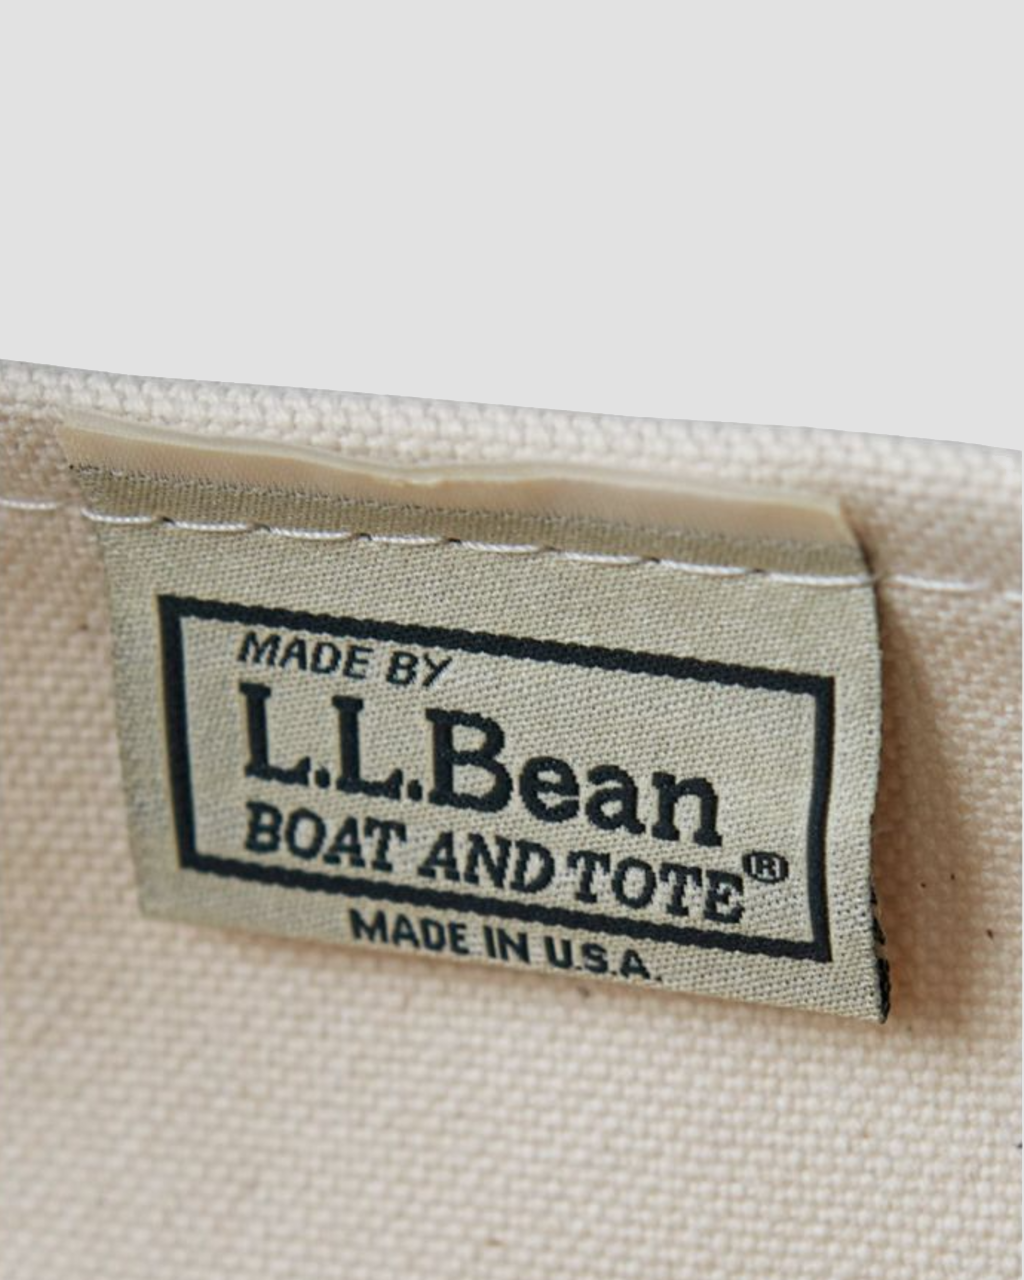 Vintage L.L.Bean Boat And Tote With Zipper, Women's Fashion, Bags